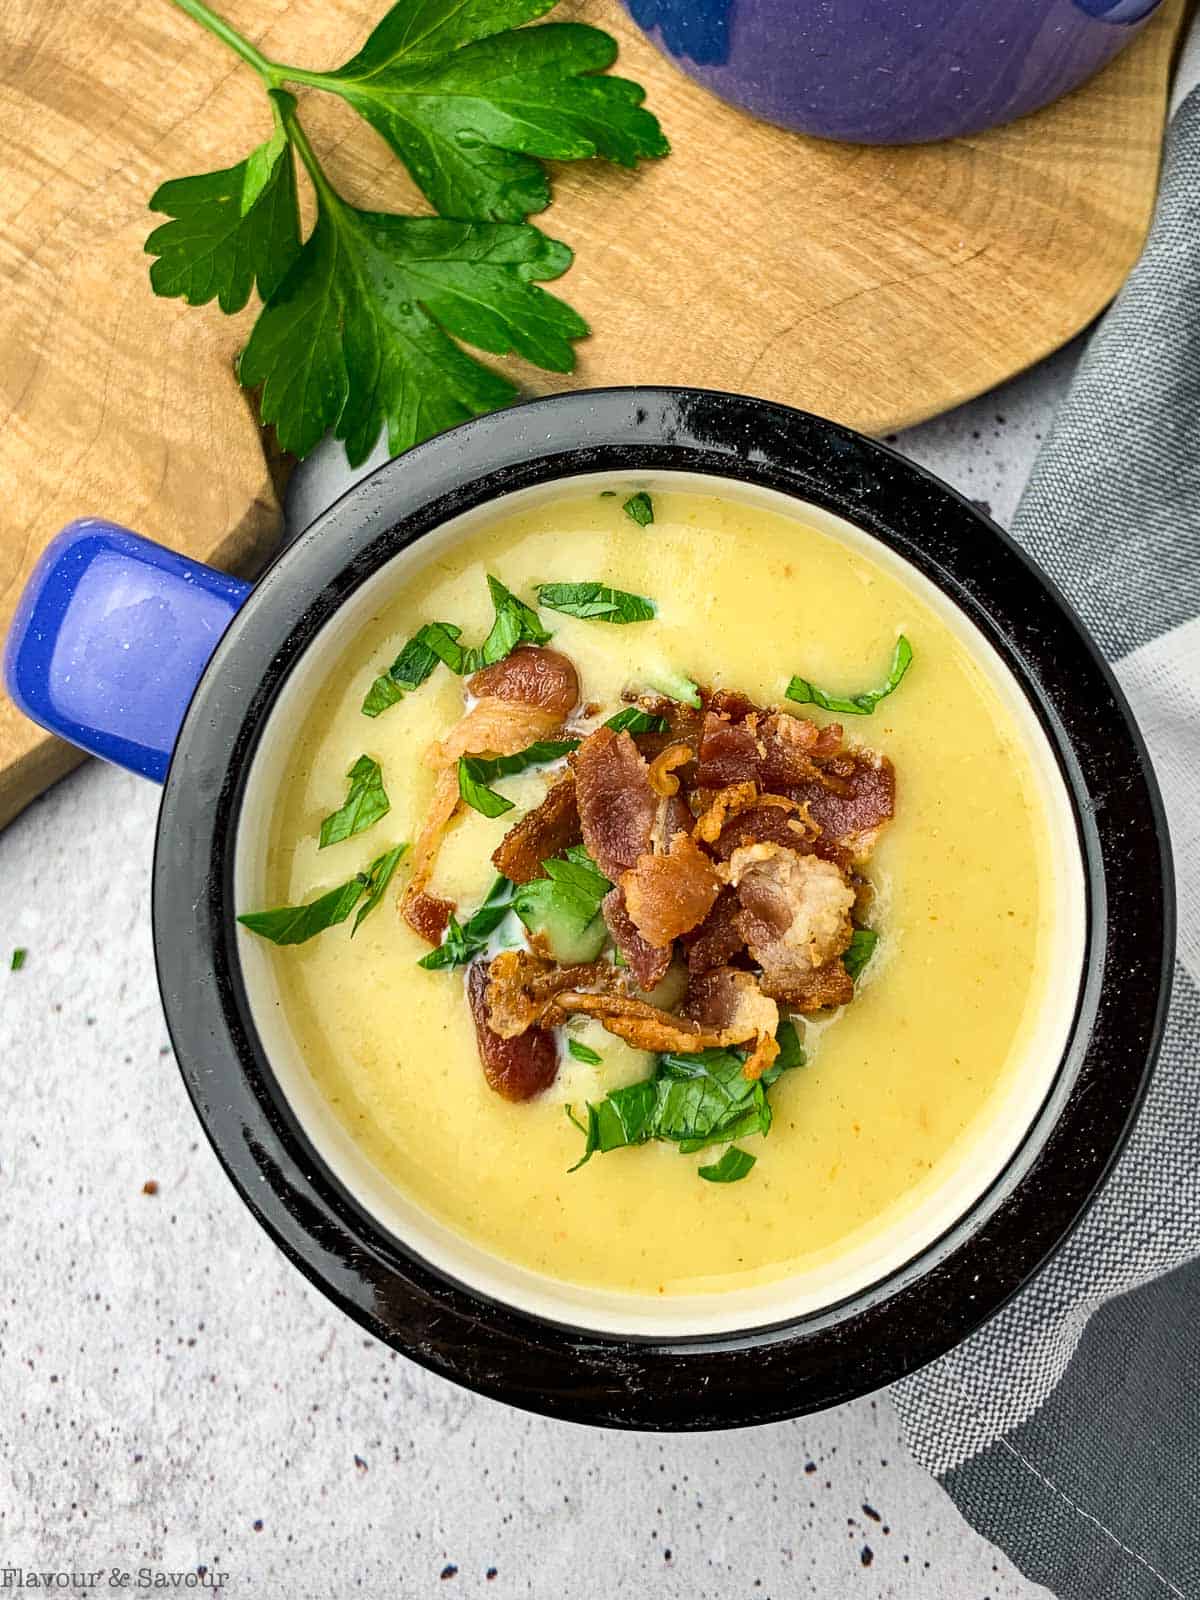 Overhead view of a mug of potato leek soup garnished with bacon bits and parsley.
